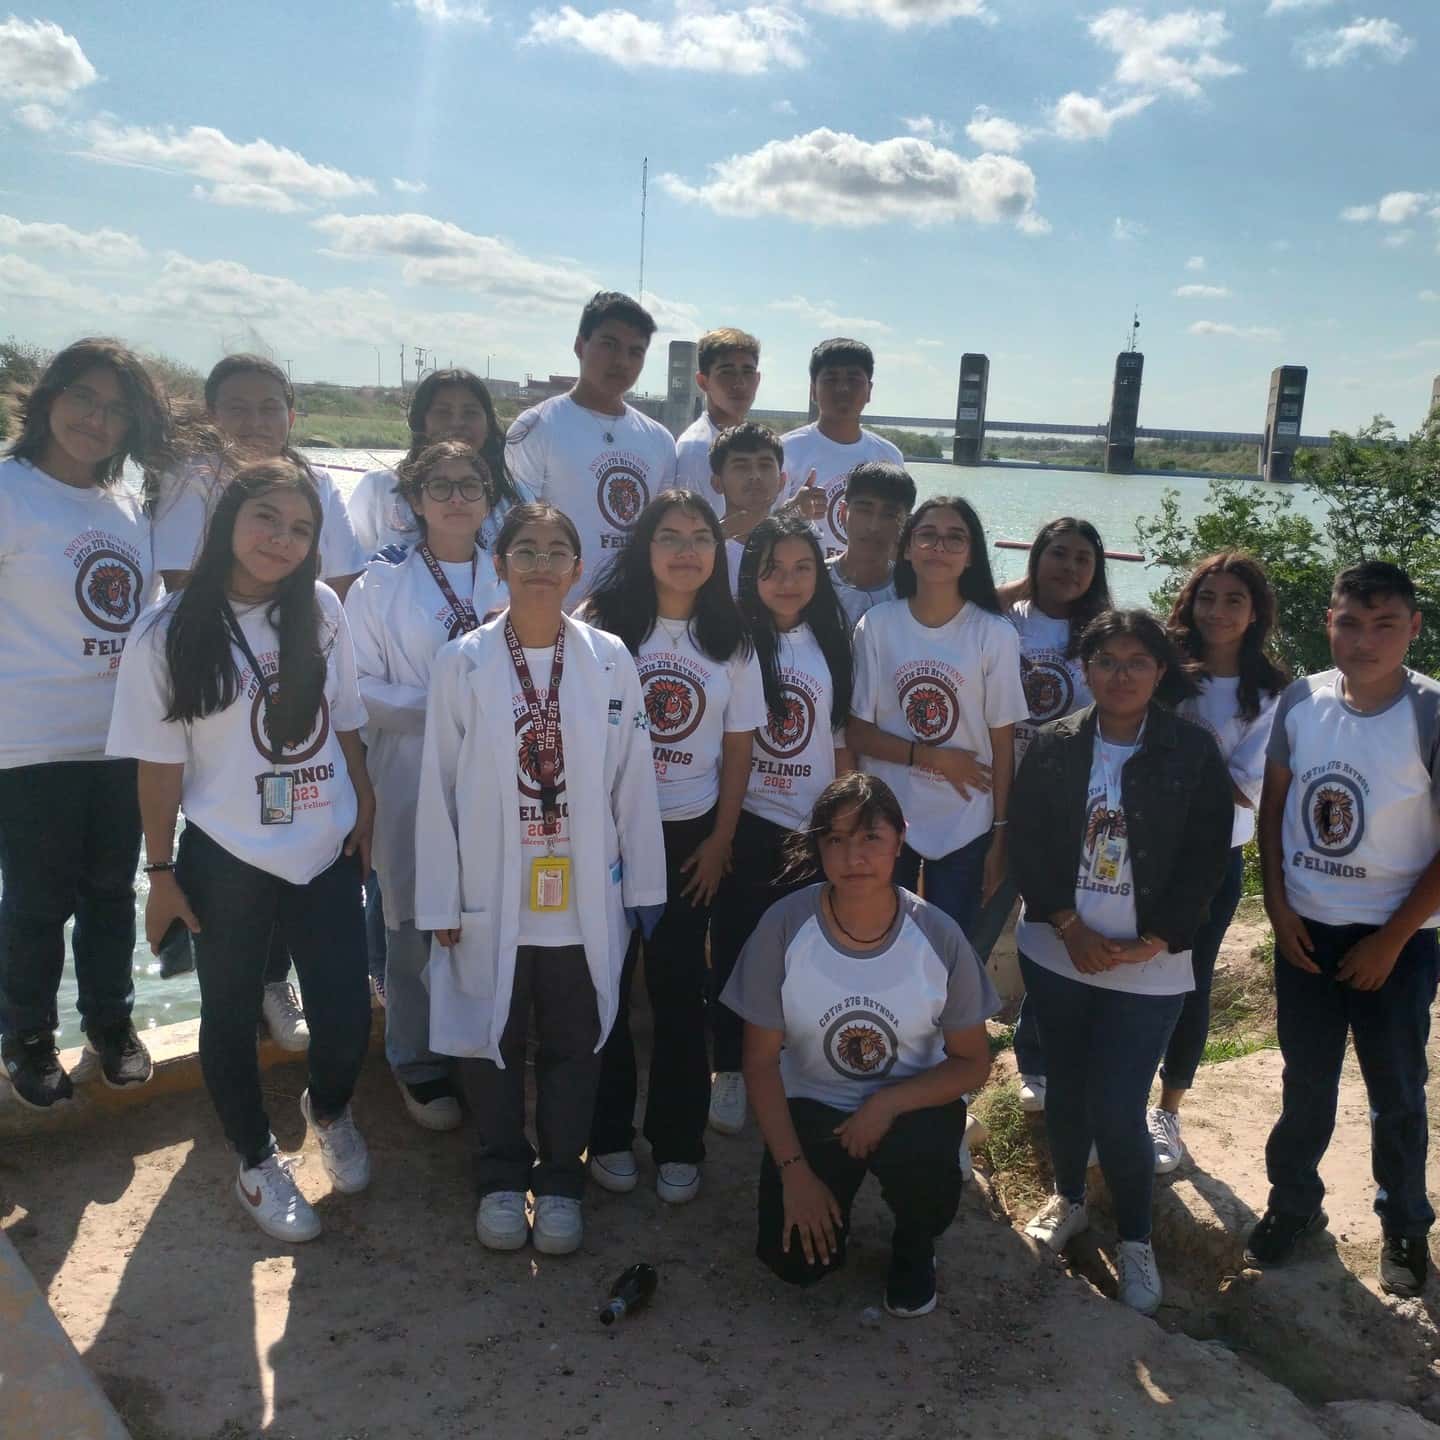 A group of students in matching t-shirts stands in front of a waterway for a photo